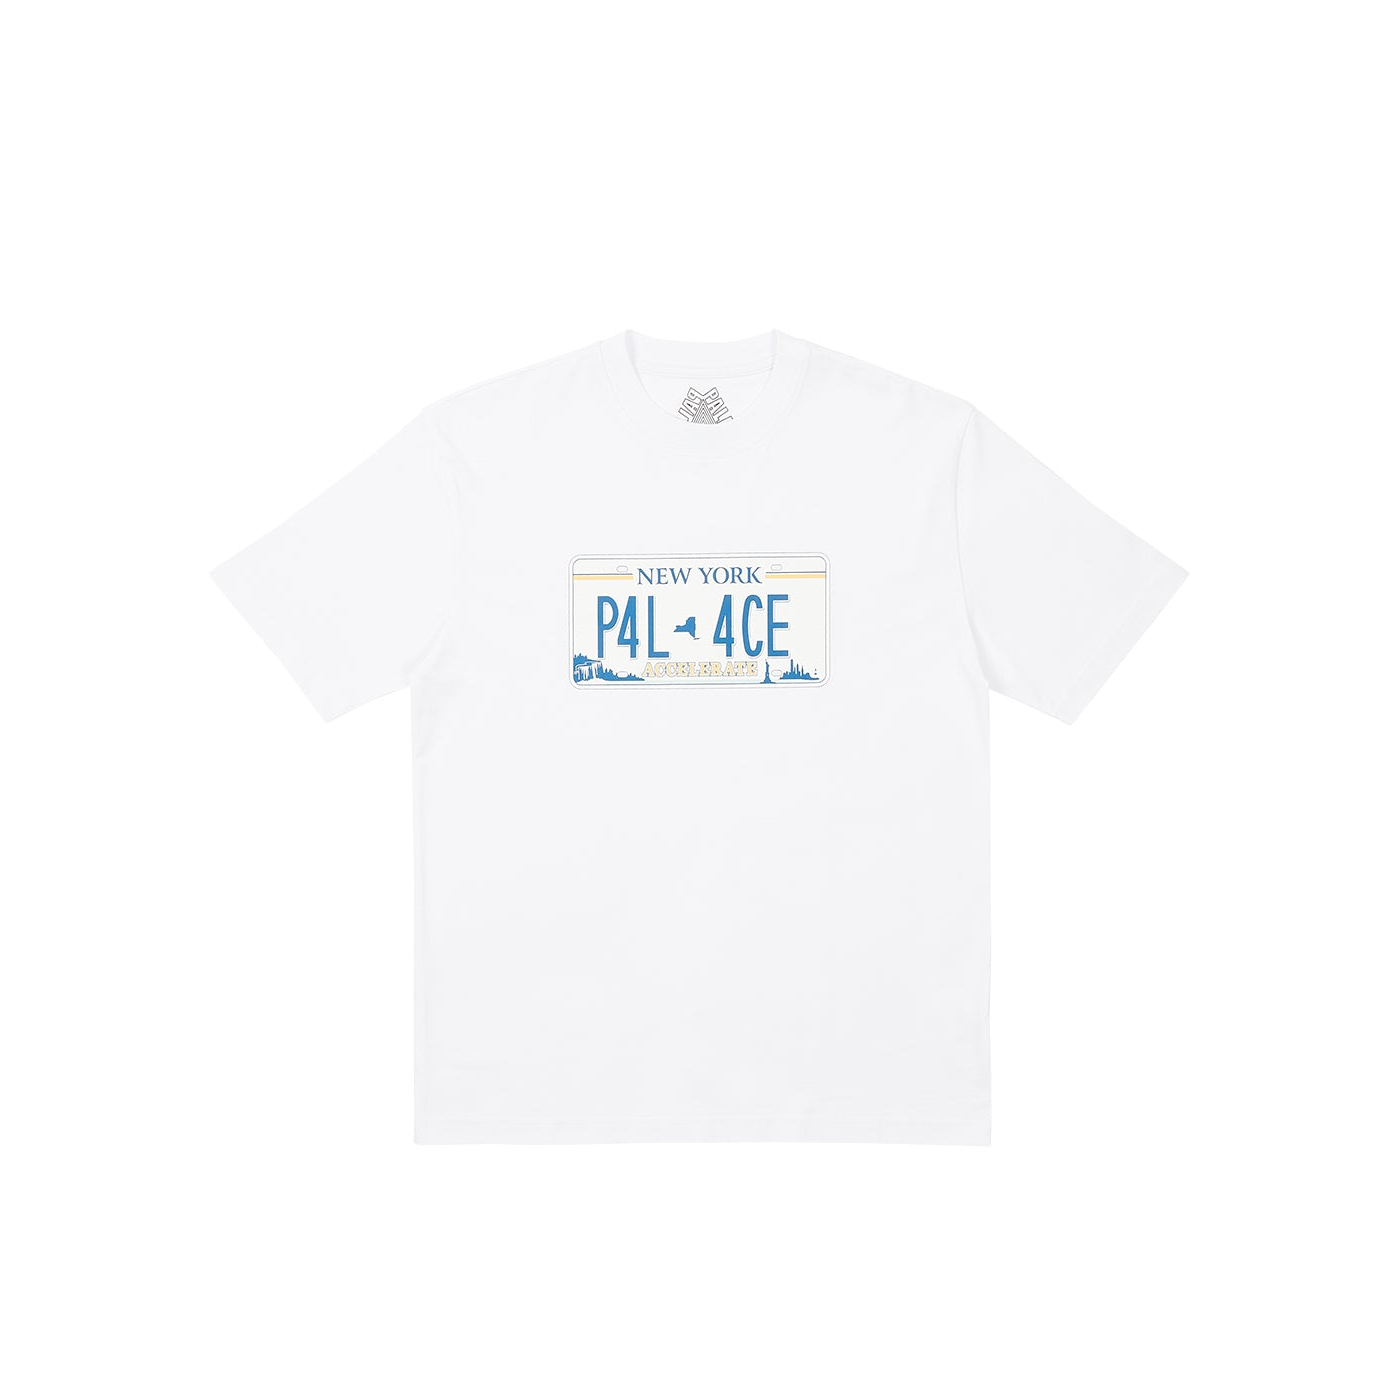 Thumbnail PLATE T-SHIRT WHITE one color